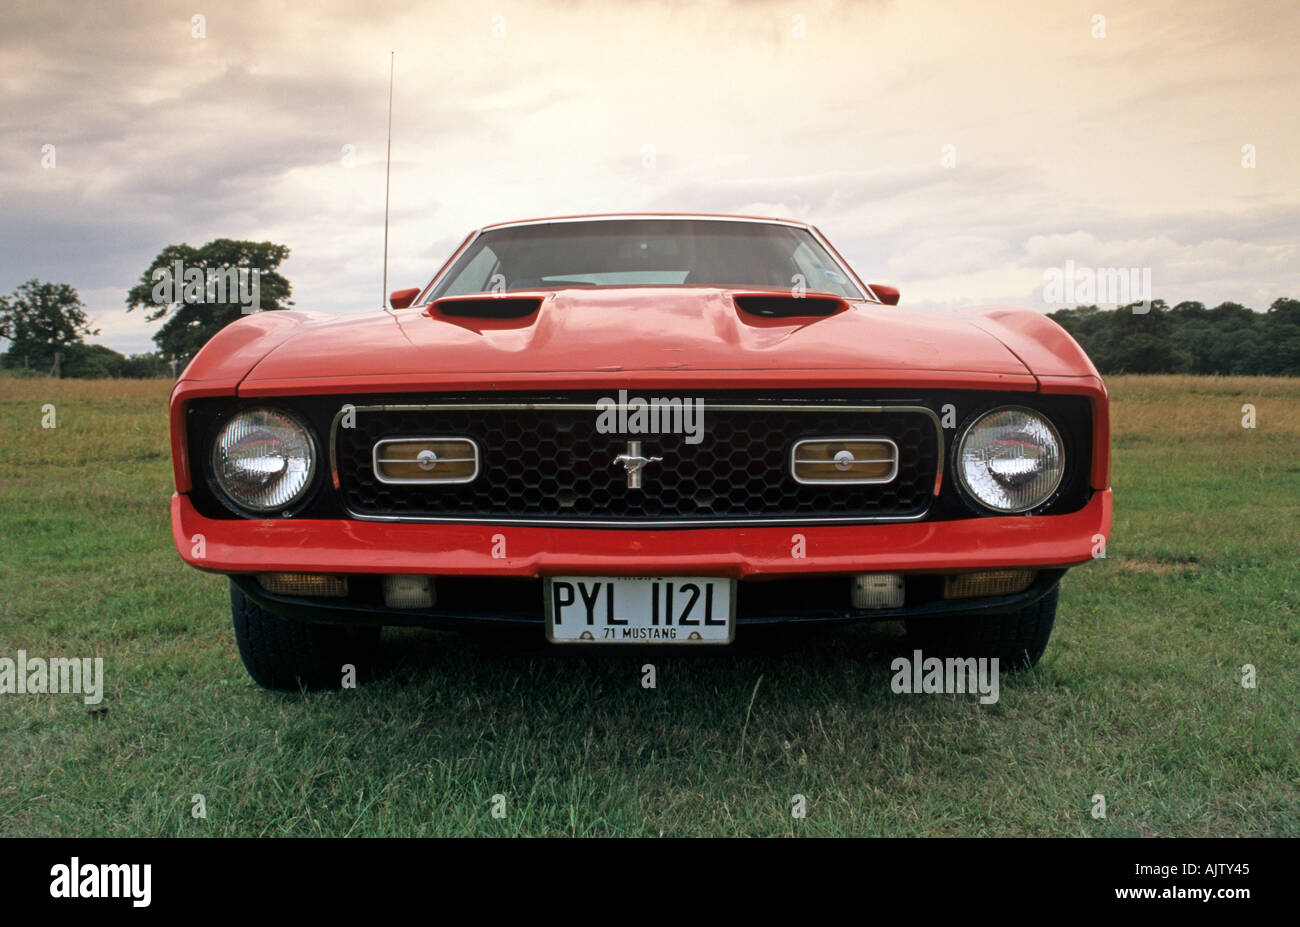 Ford Mustang Mach 1 of 1971 Stock Photo